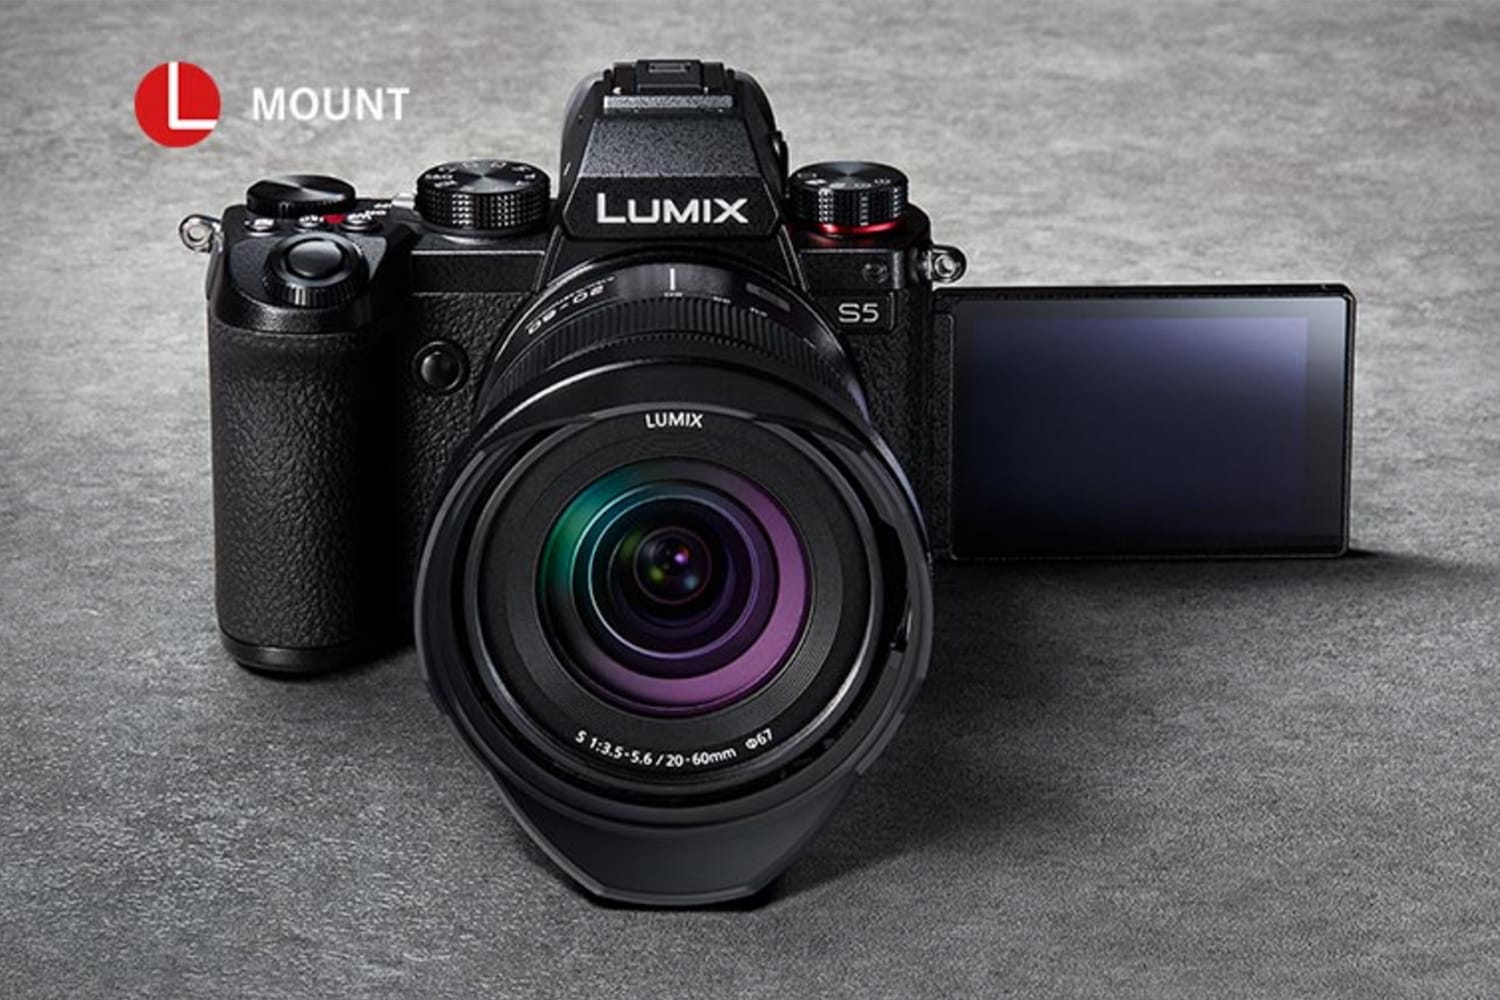 Panasonic Lumix S5 VS Sony A7III: Which One Is Better?